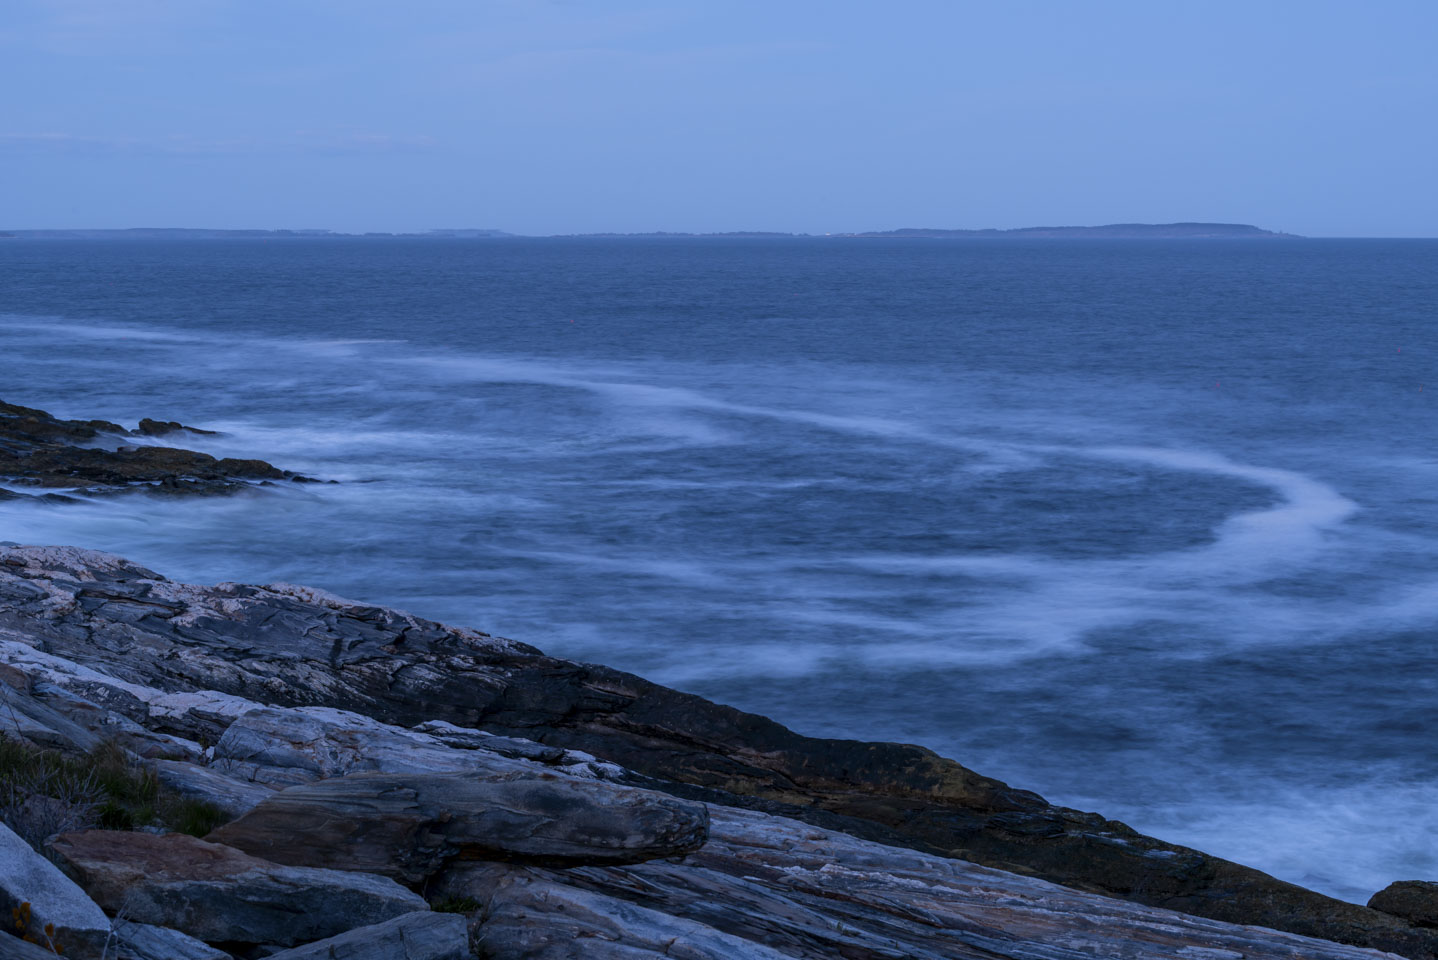 The water at Pemaquid just after sunset and before moonrise